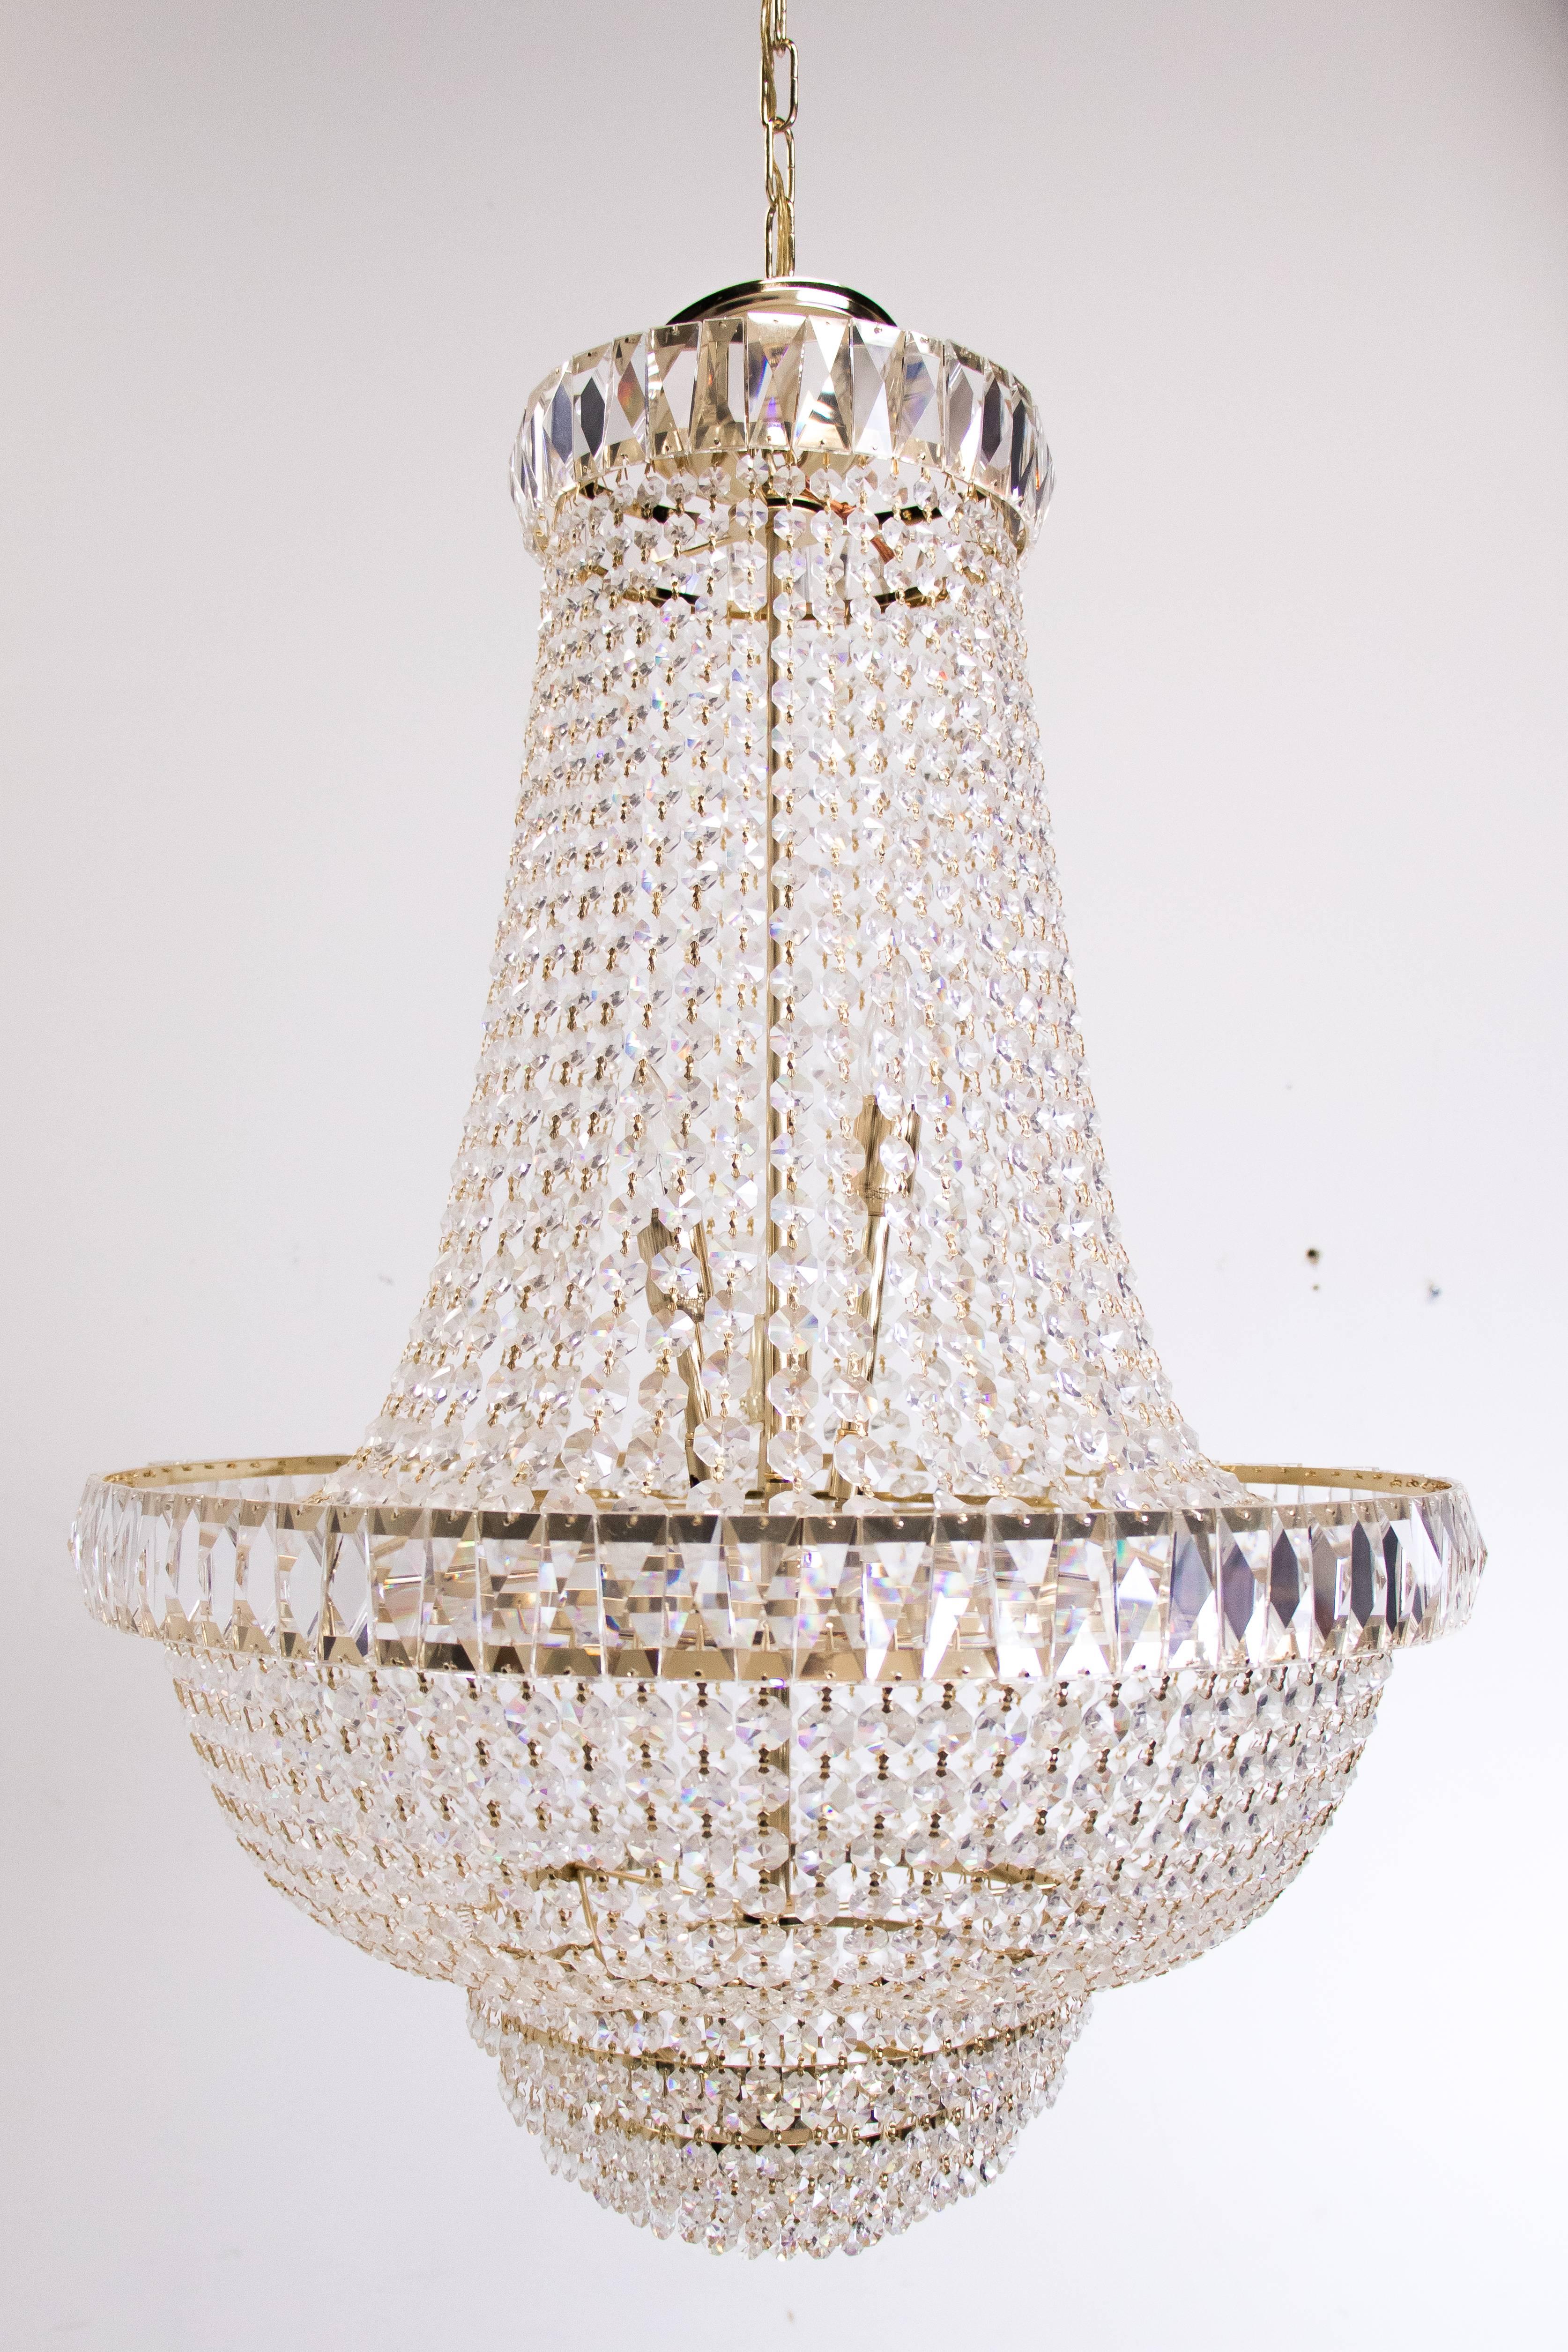 Nine-light crystal chandelier. The chandelier is in good vintage condition with signs of wear due to age.

Dimensions: 24